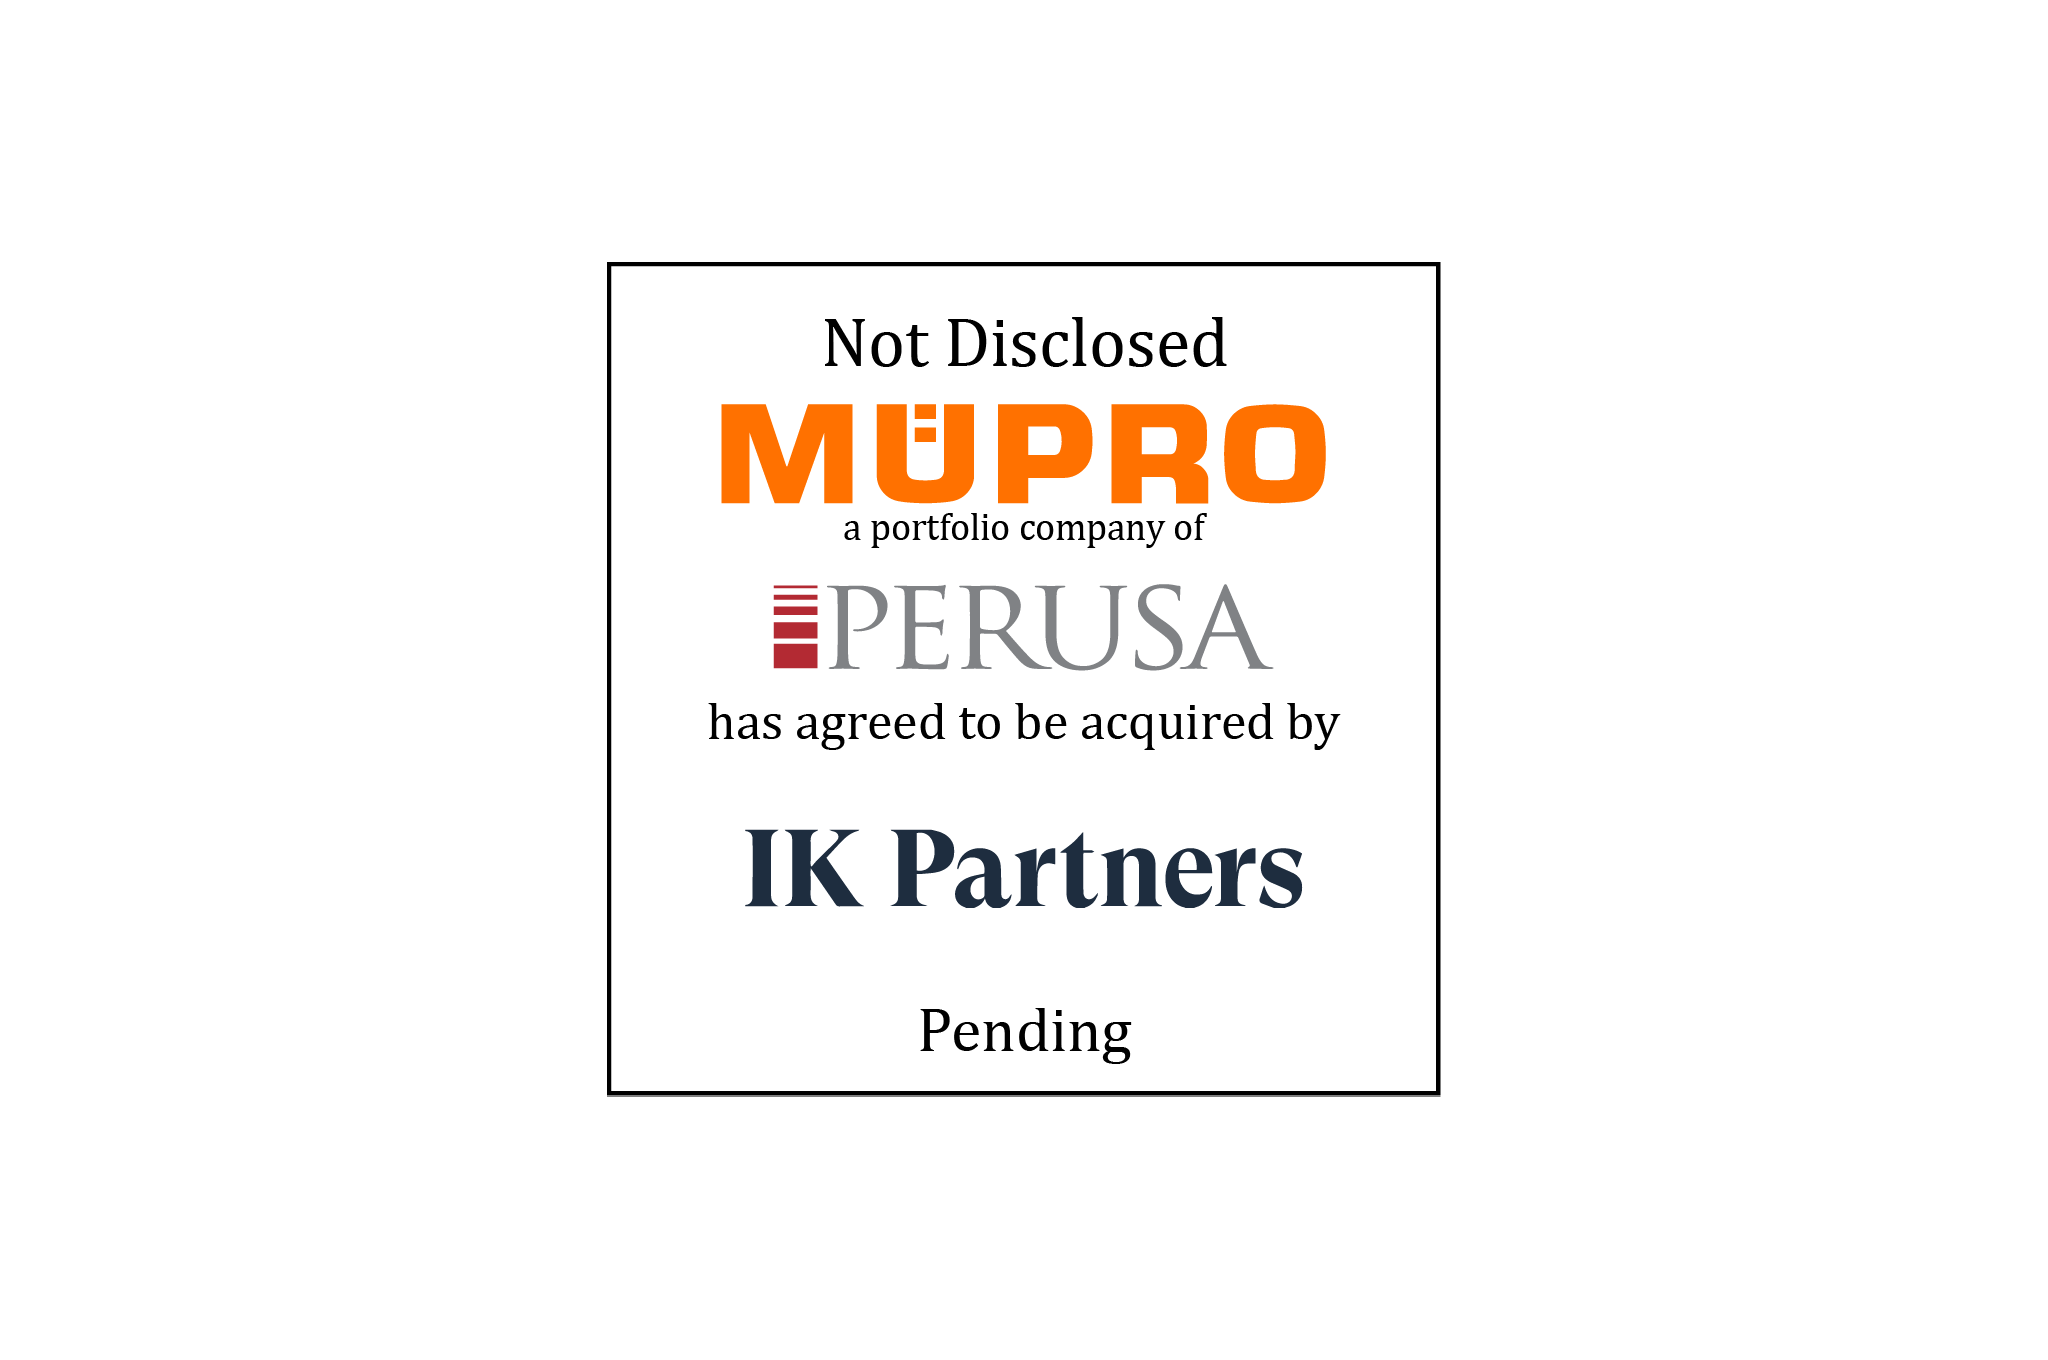 Tombstone: MUPRO (logo) a portfolio company of PERUSA (logo) has agreed to be acquired by IK Partners, Pending